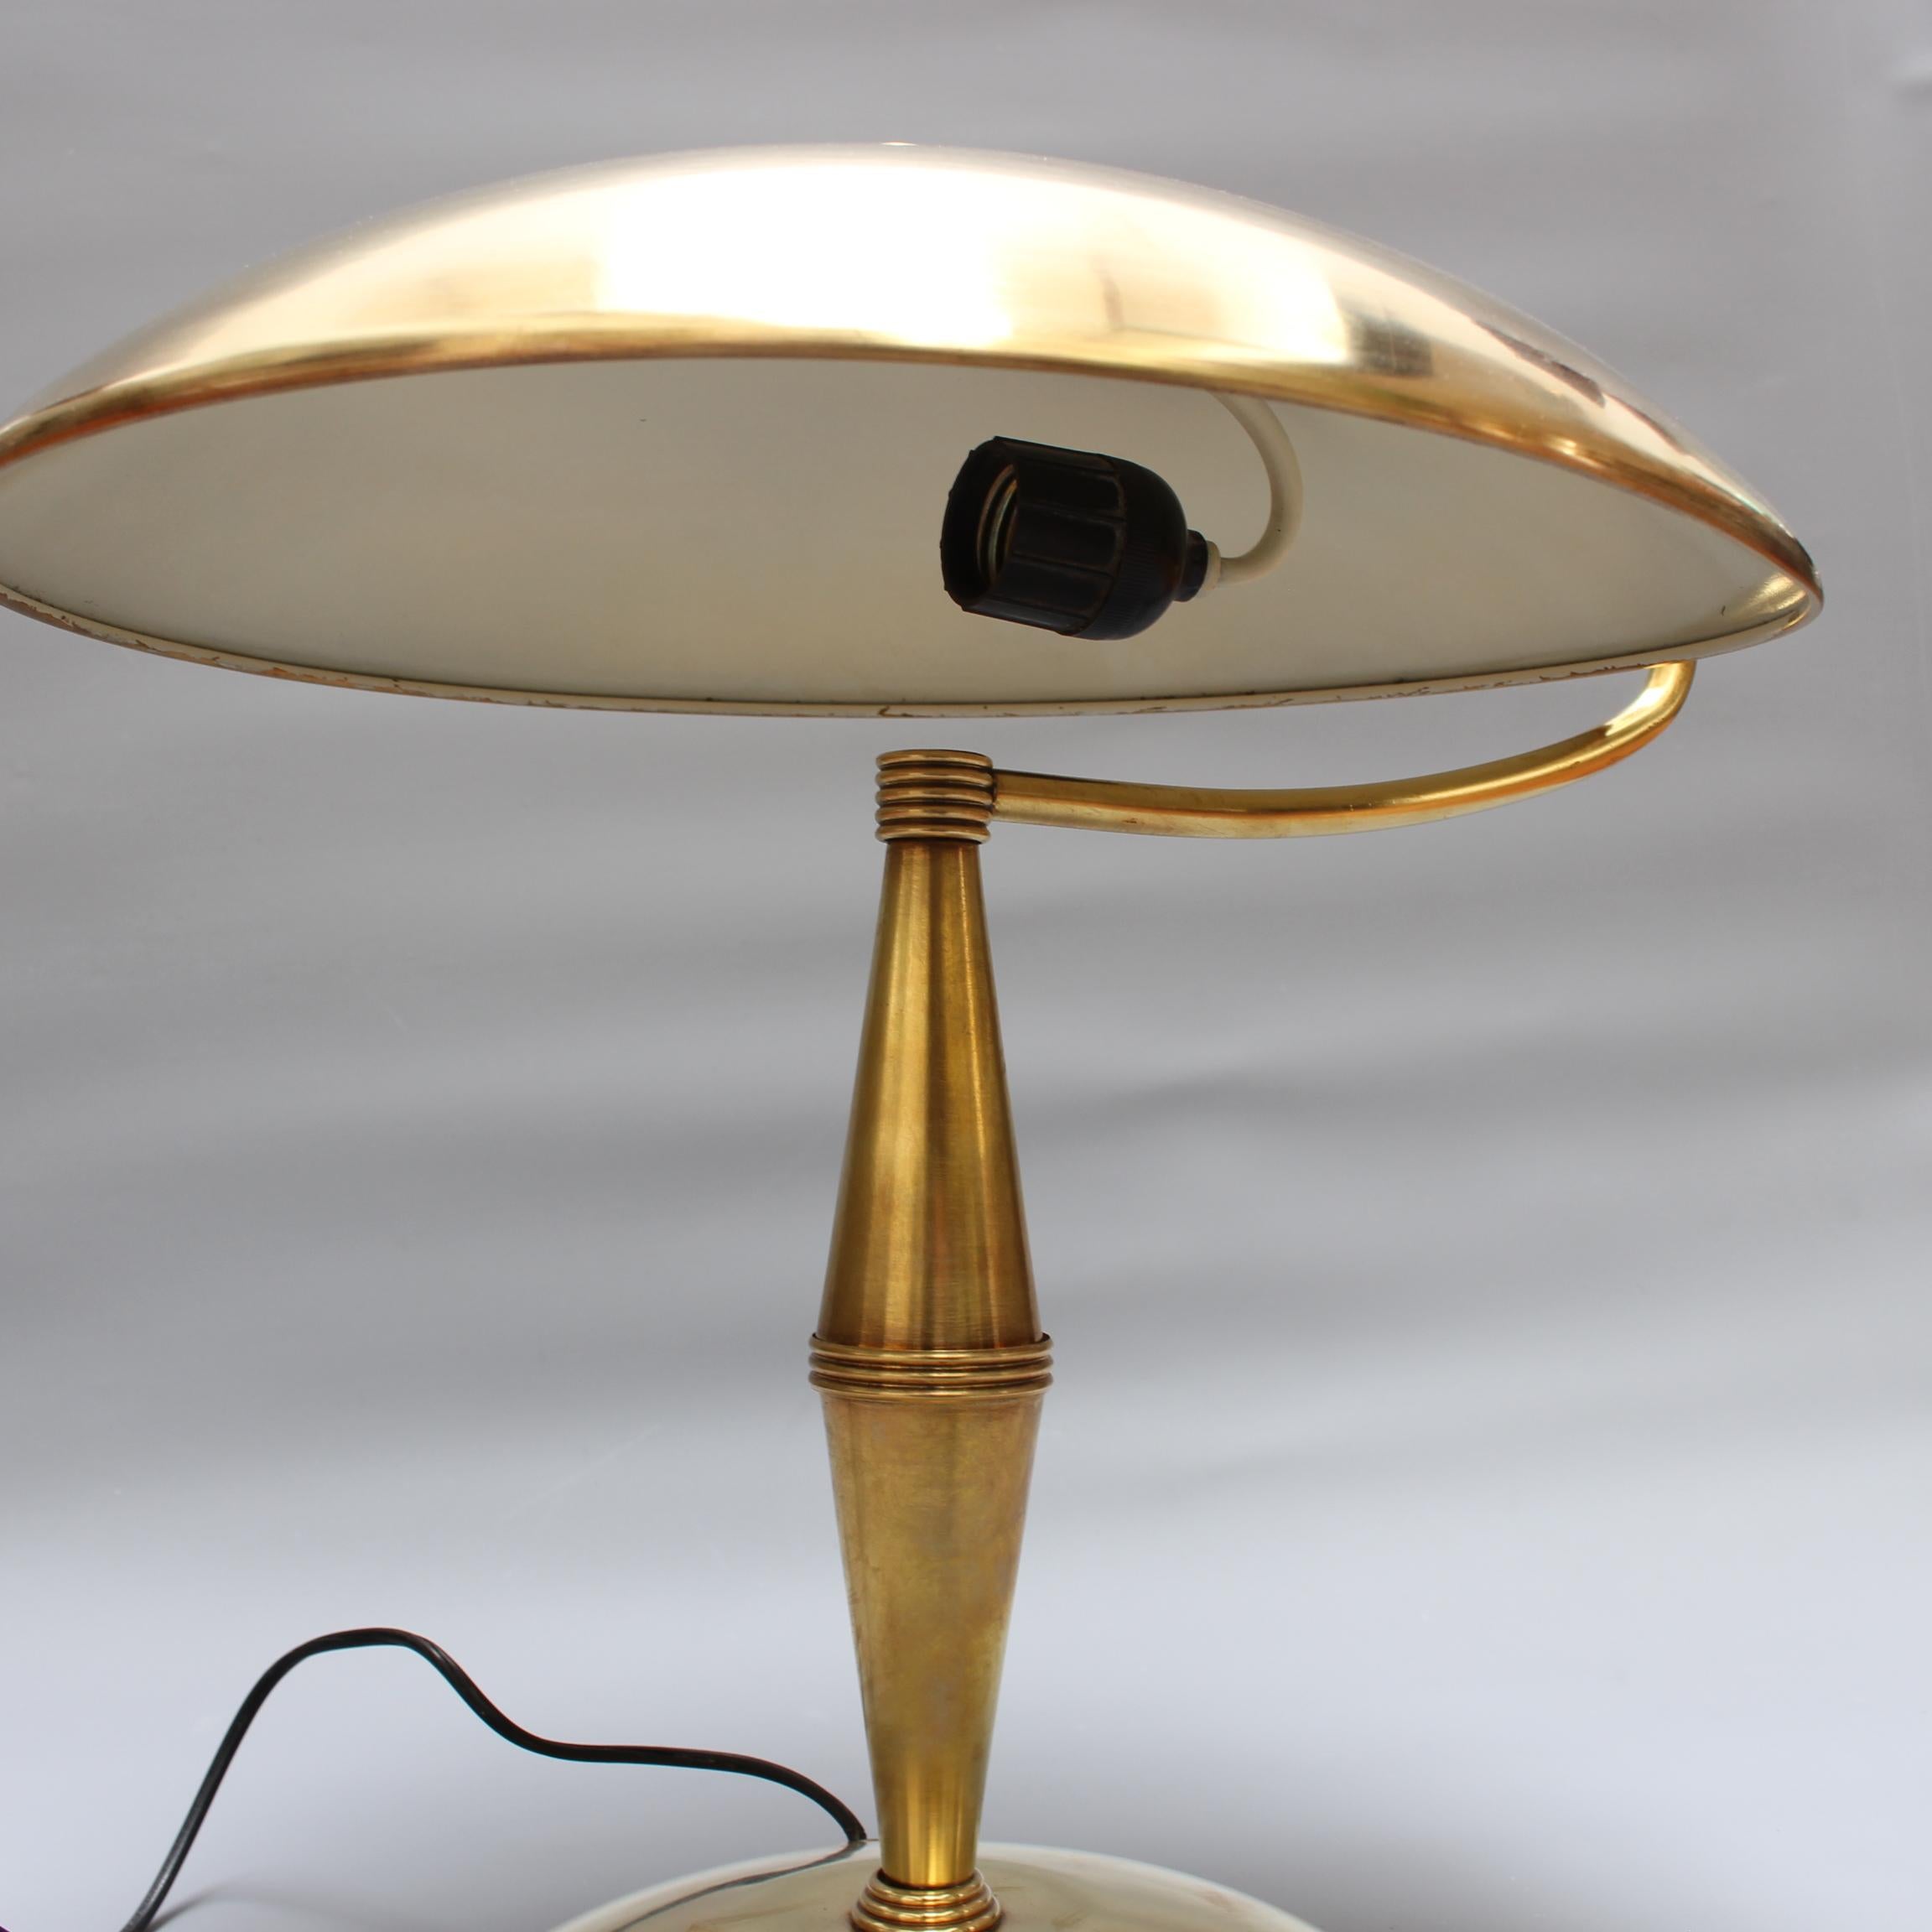 Italian Vintage Brass Table Lamp with Swivel Arm 'circa 1950s' For Sale 4